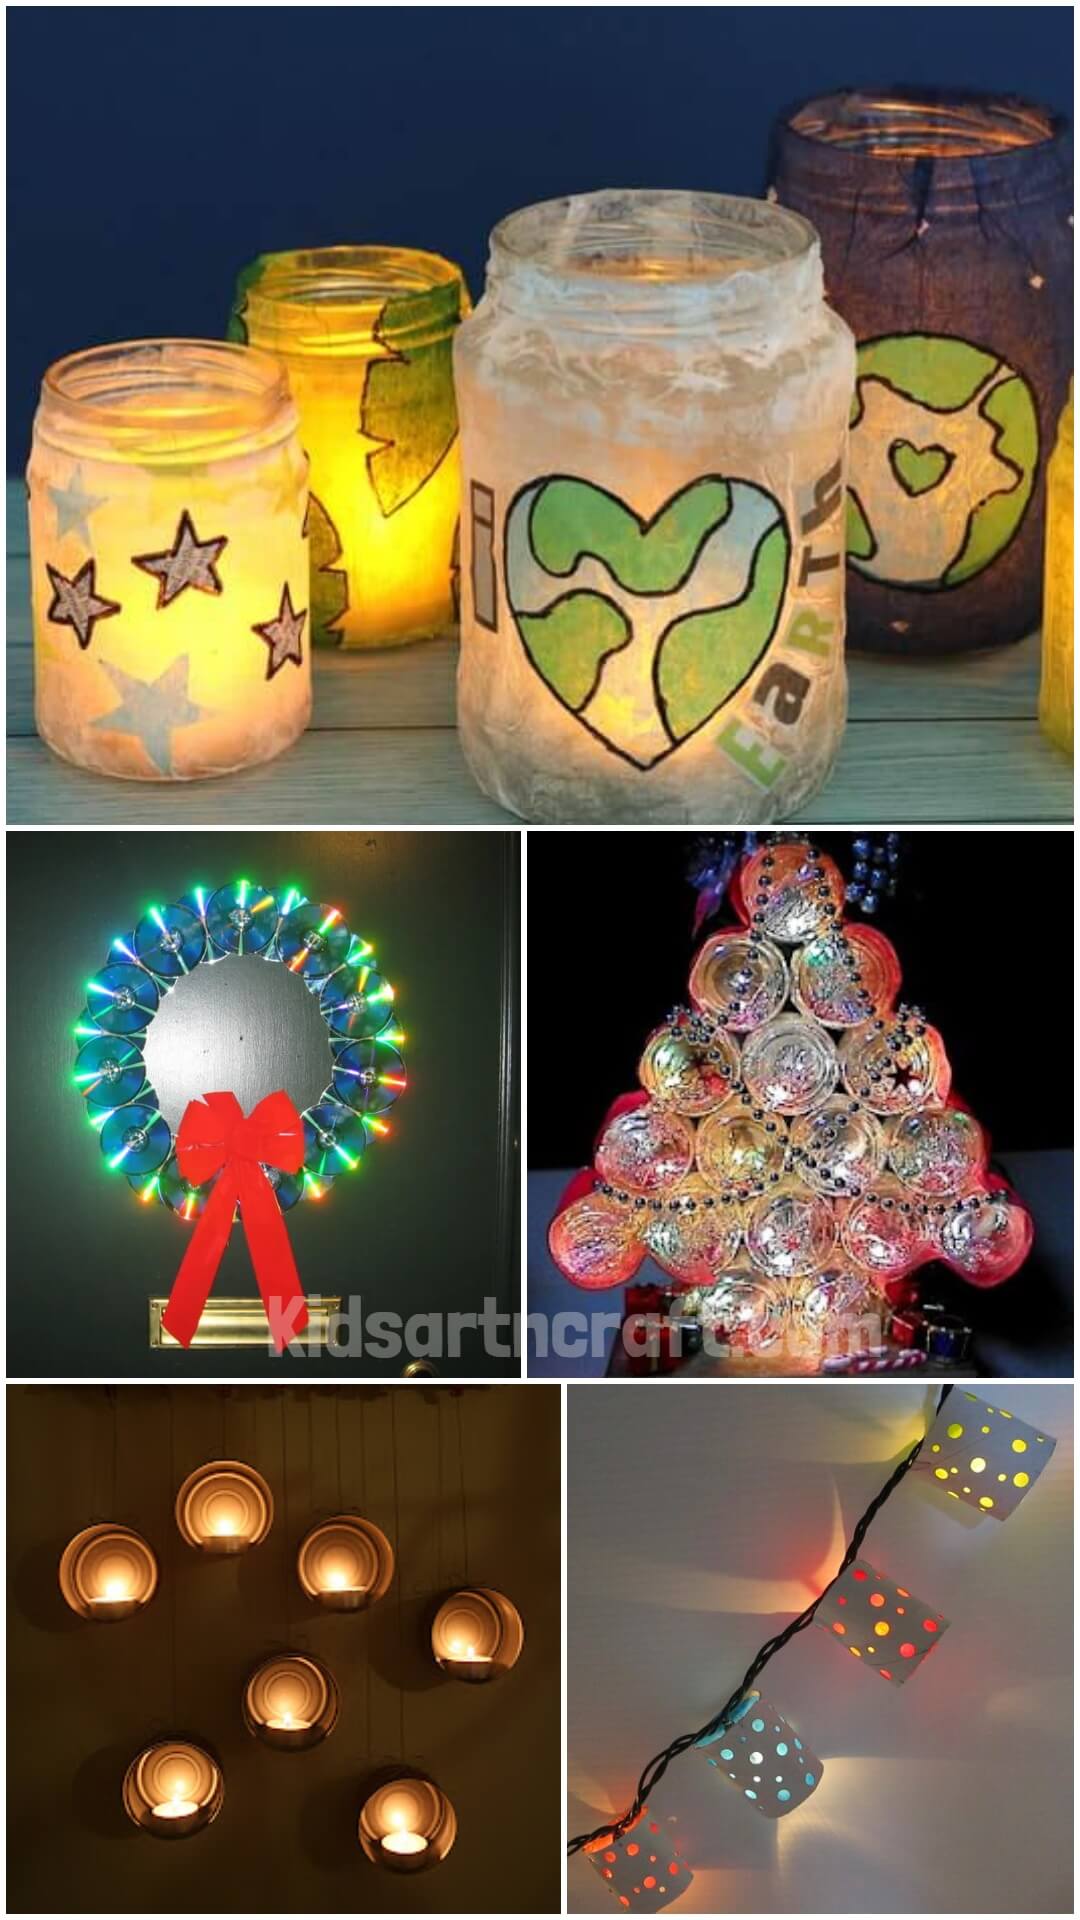  Christmas lantern Ideas Using Recycled materials